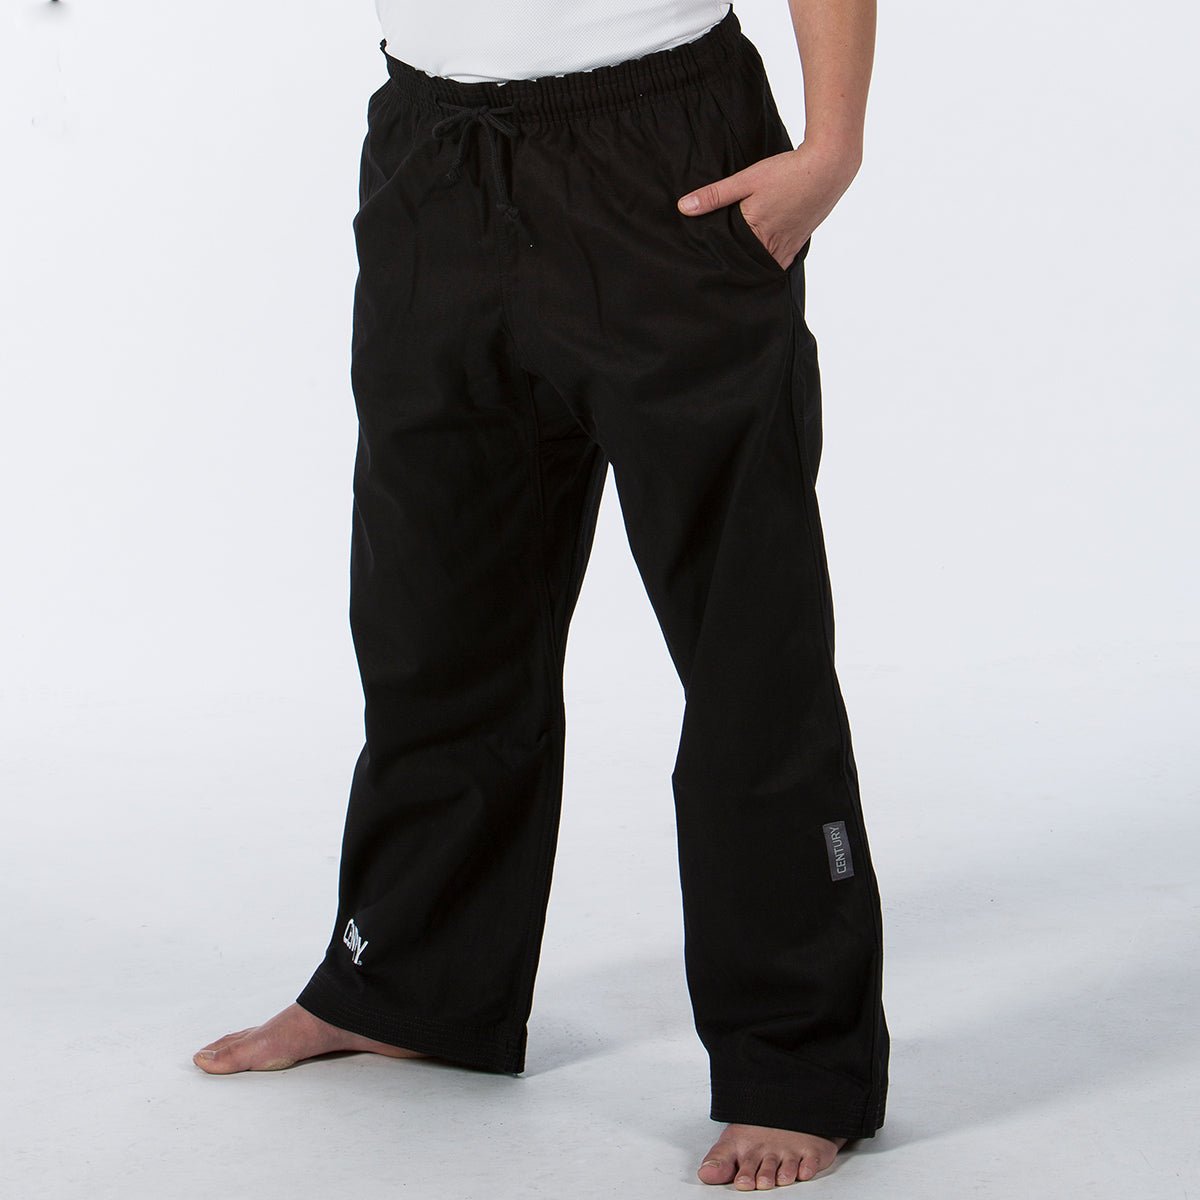 Middleweight Black Pants (with Pocket) - Ripple Effect Martial Arts